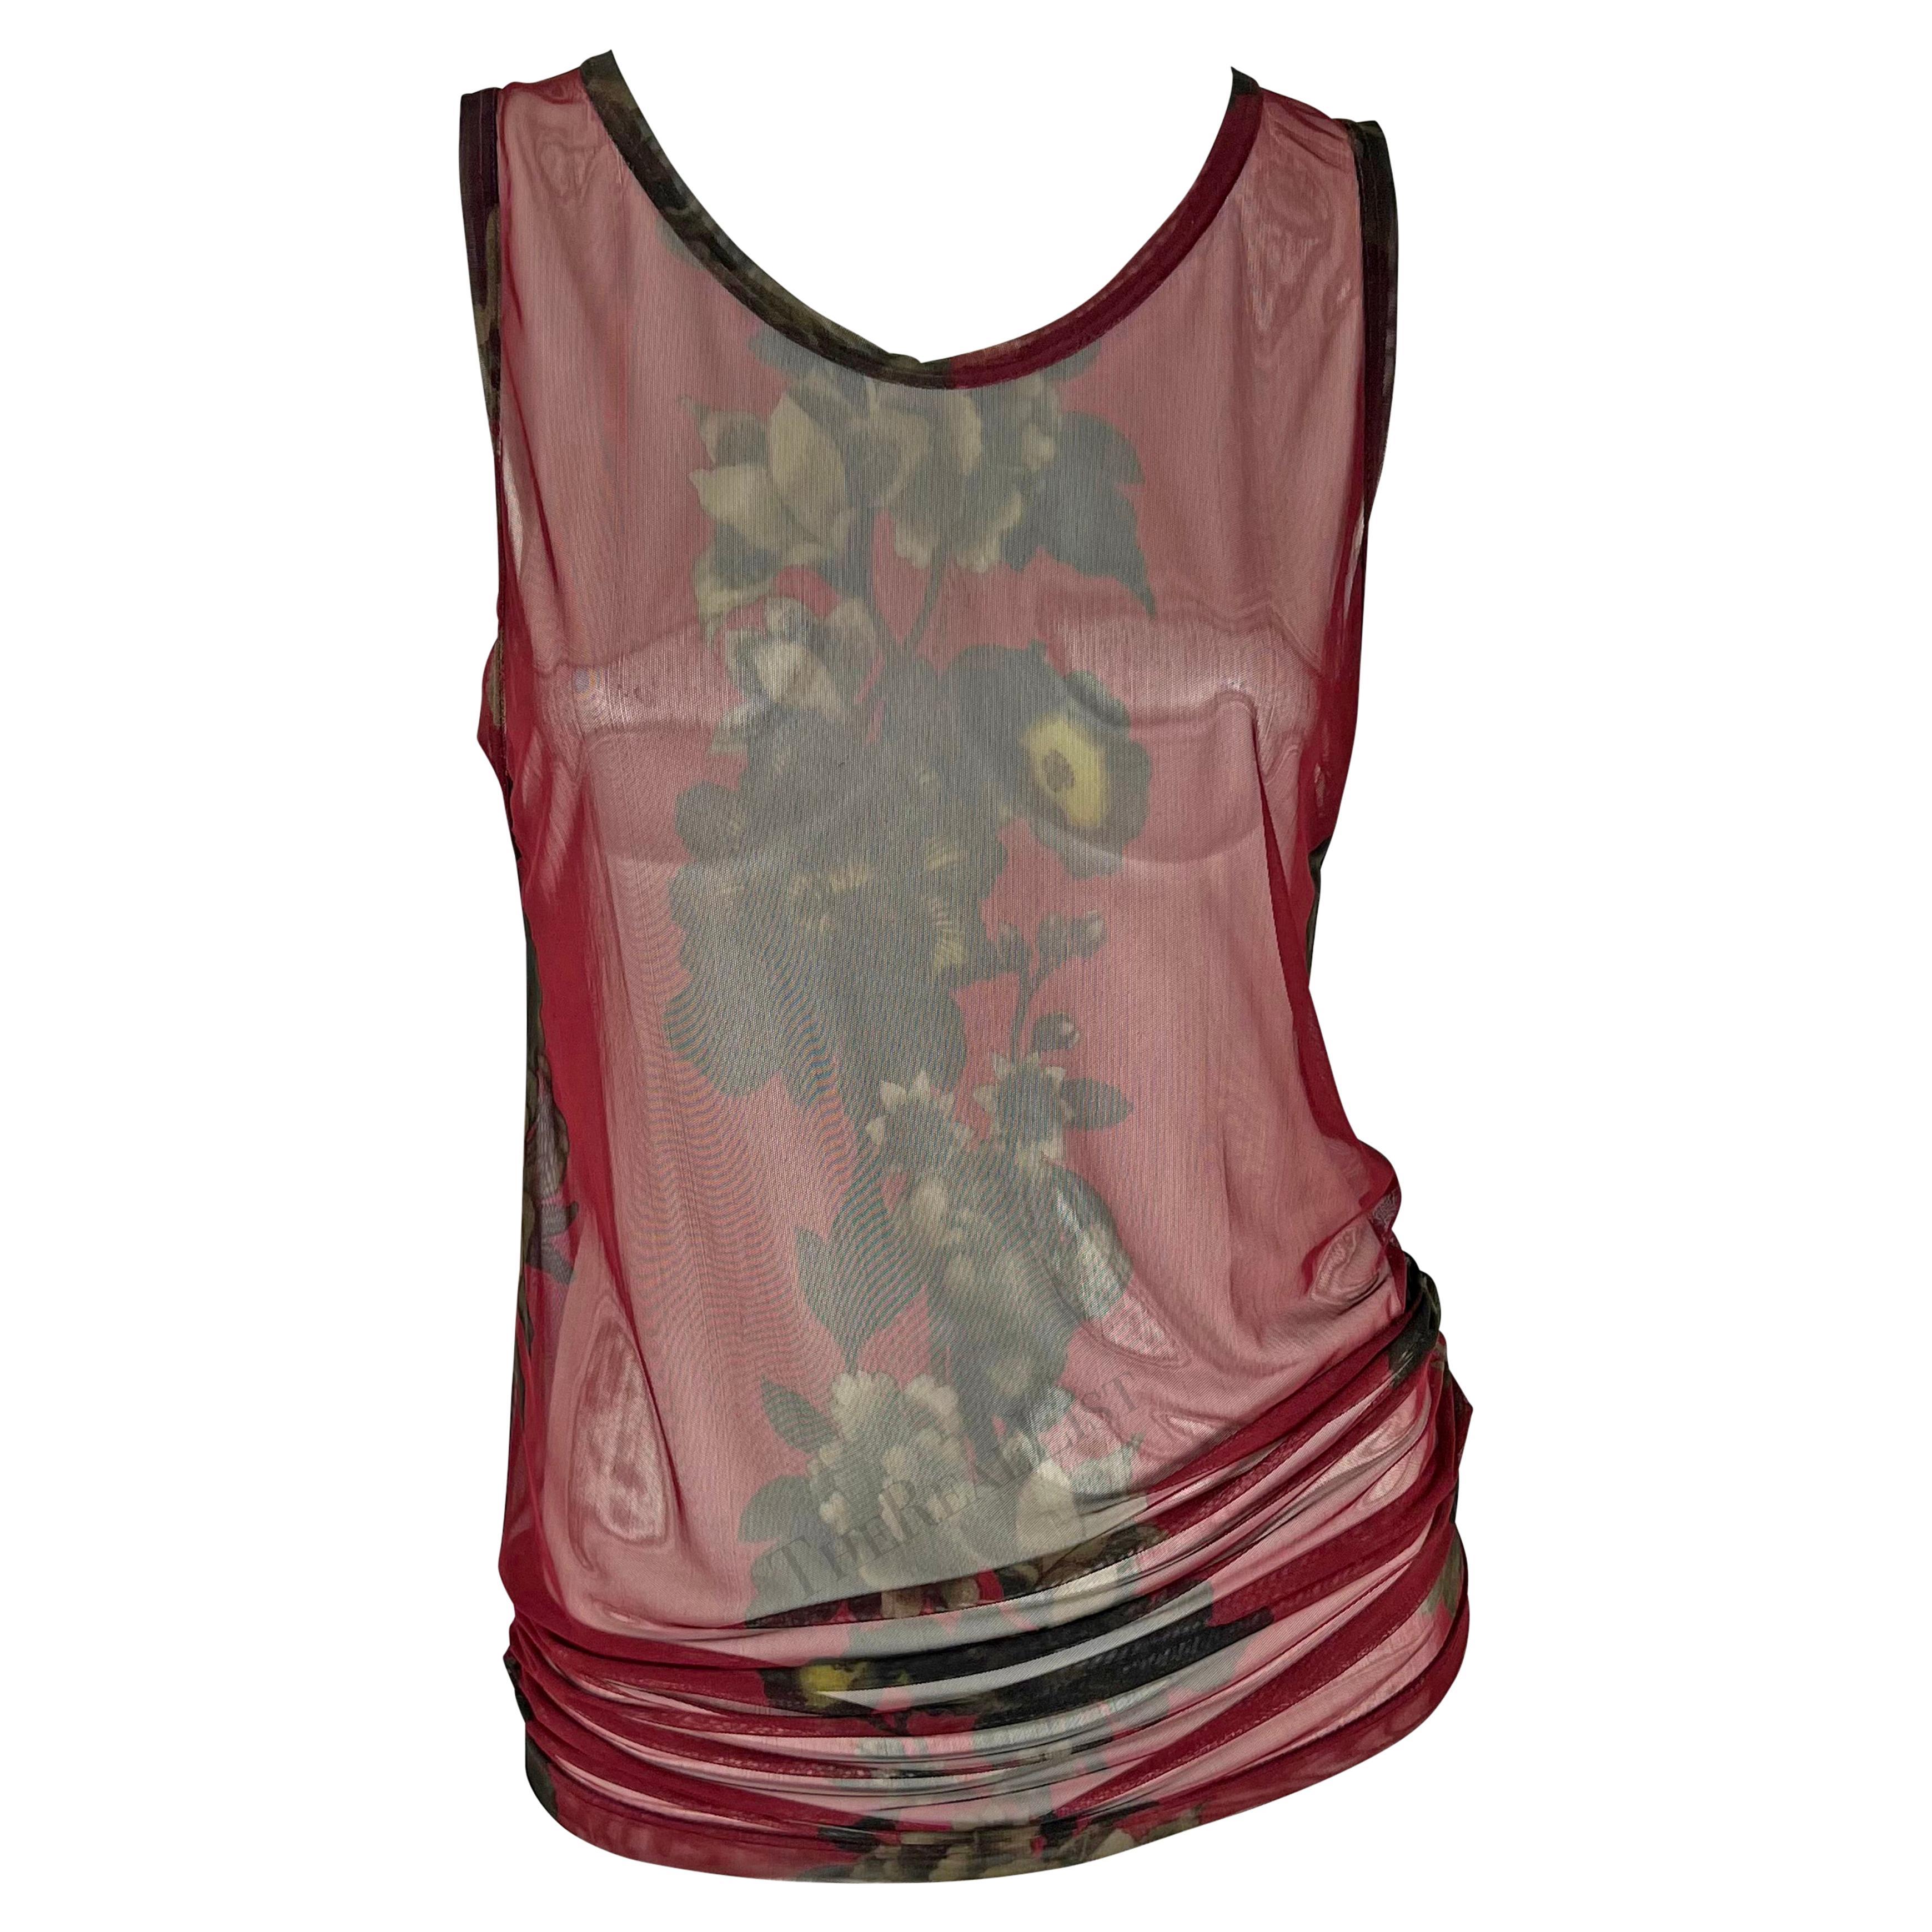 TheRealList presents: a chic red mesh men's Gucci tank top, designed by Tom Ford. From the Spring/Summer 1999 collection, this red shirt features a monotone floral print down the center of the top. Truly unisex, this piece can easily be worn as a